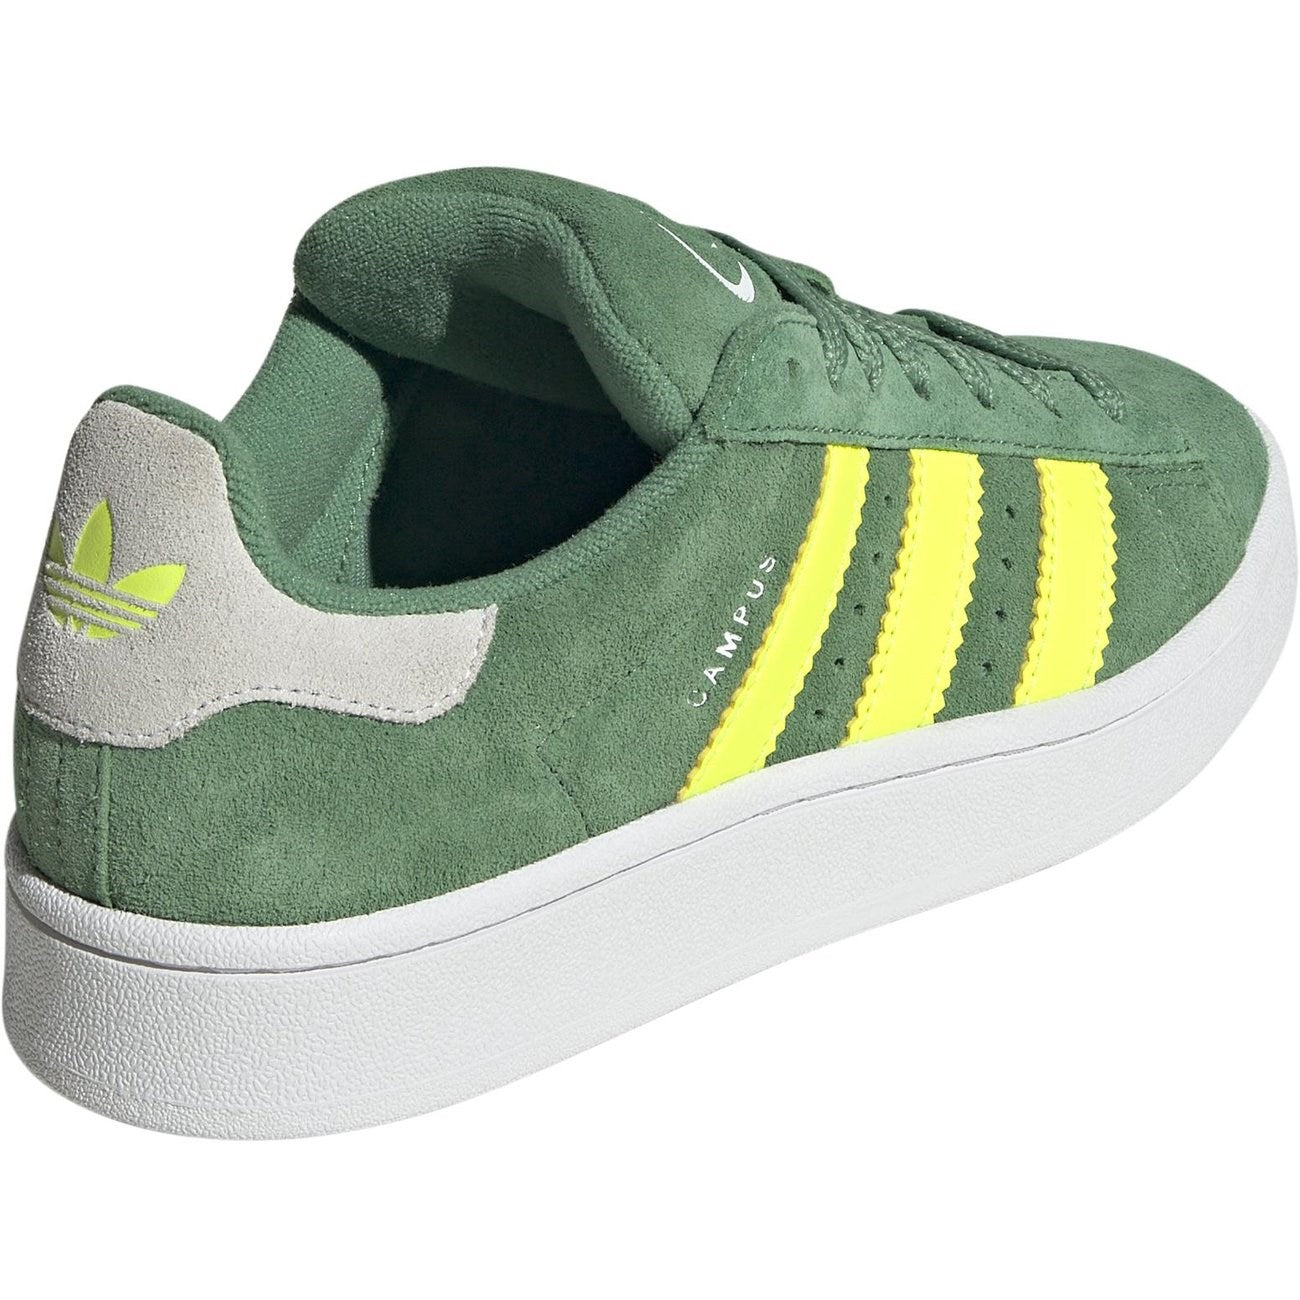 adidas Originals CAMPUS 00s J Sneakers Preloved Green / Solar Yellow / Cloud White 4